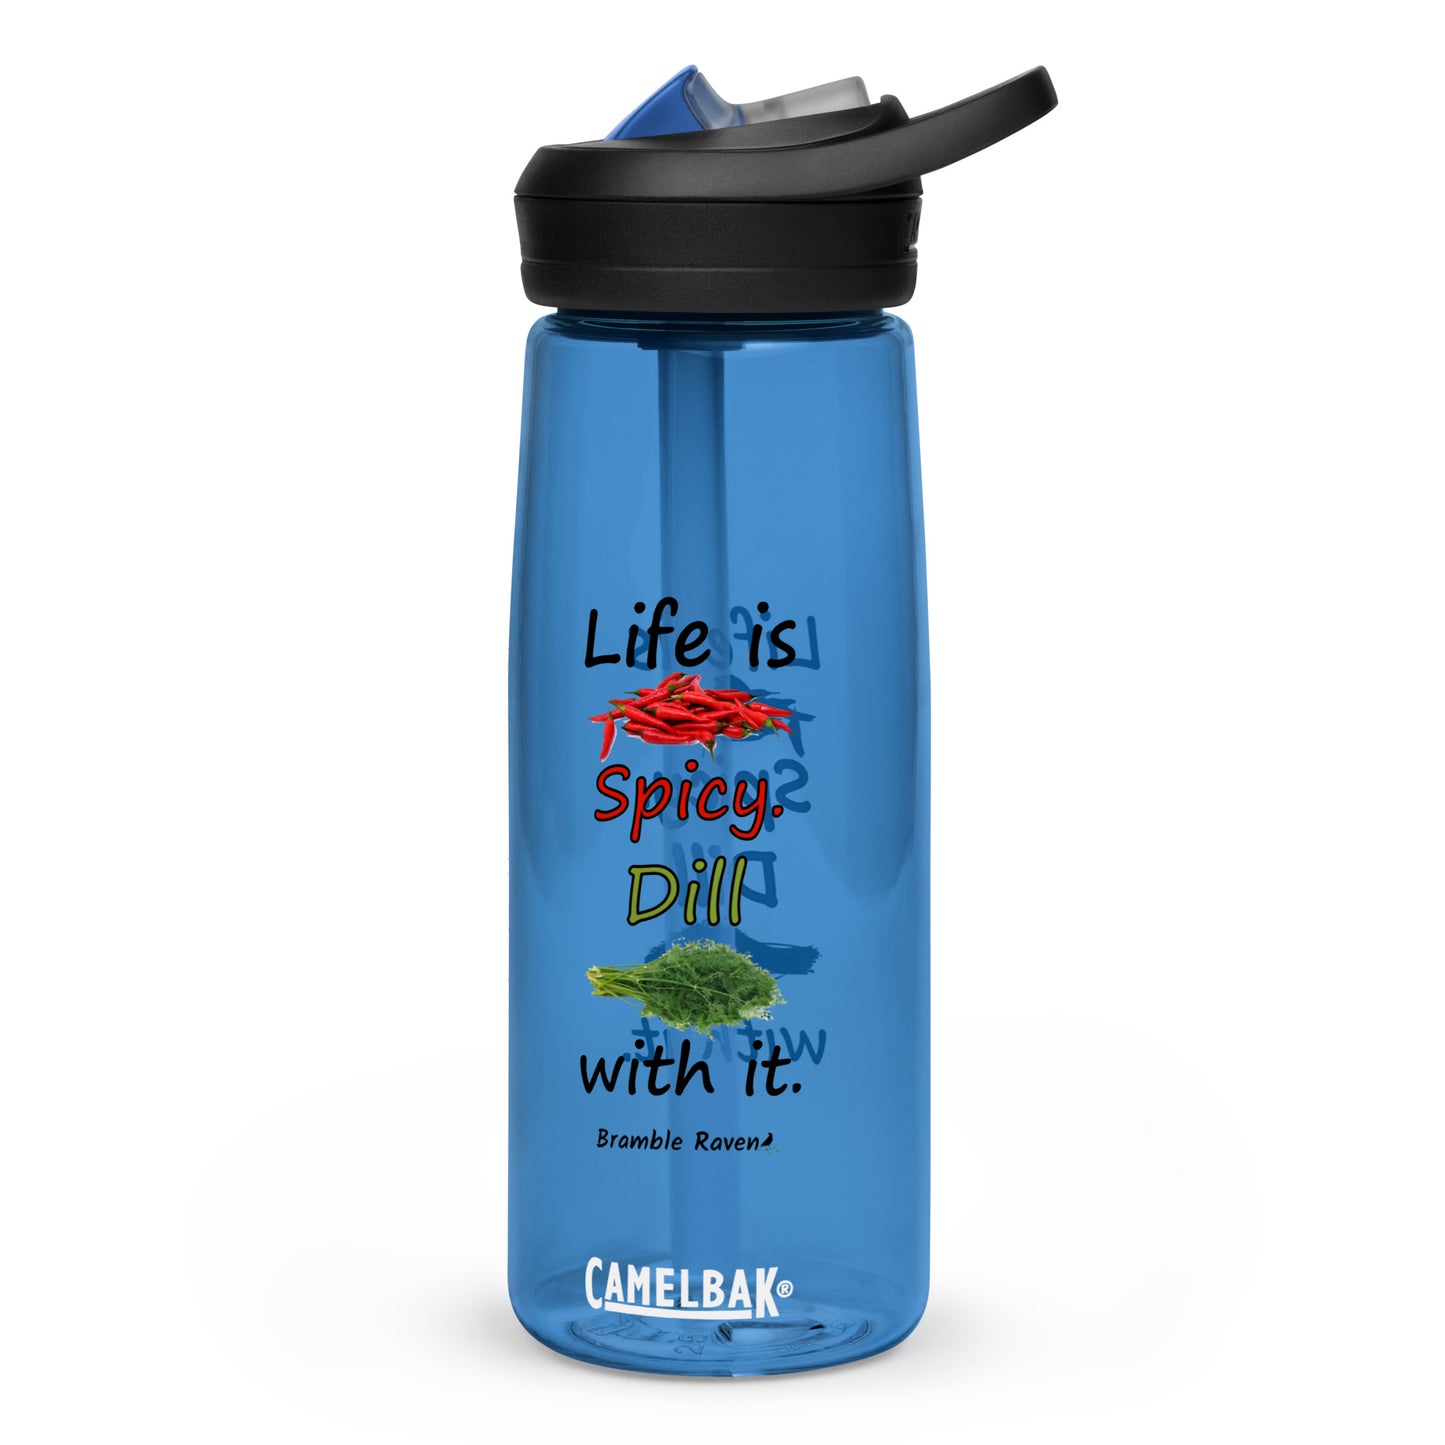 25 ounce sports water bottle with spill-proof lid and bite valve. Dark blue stain and odor-resistant BPA-free plastic. Features double-sided design of "Life is spicy. Dill with it" phrase with peppers and dill weed images.